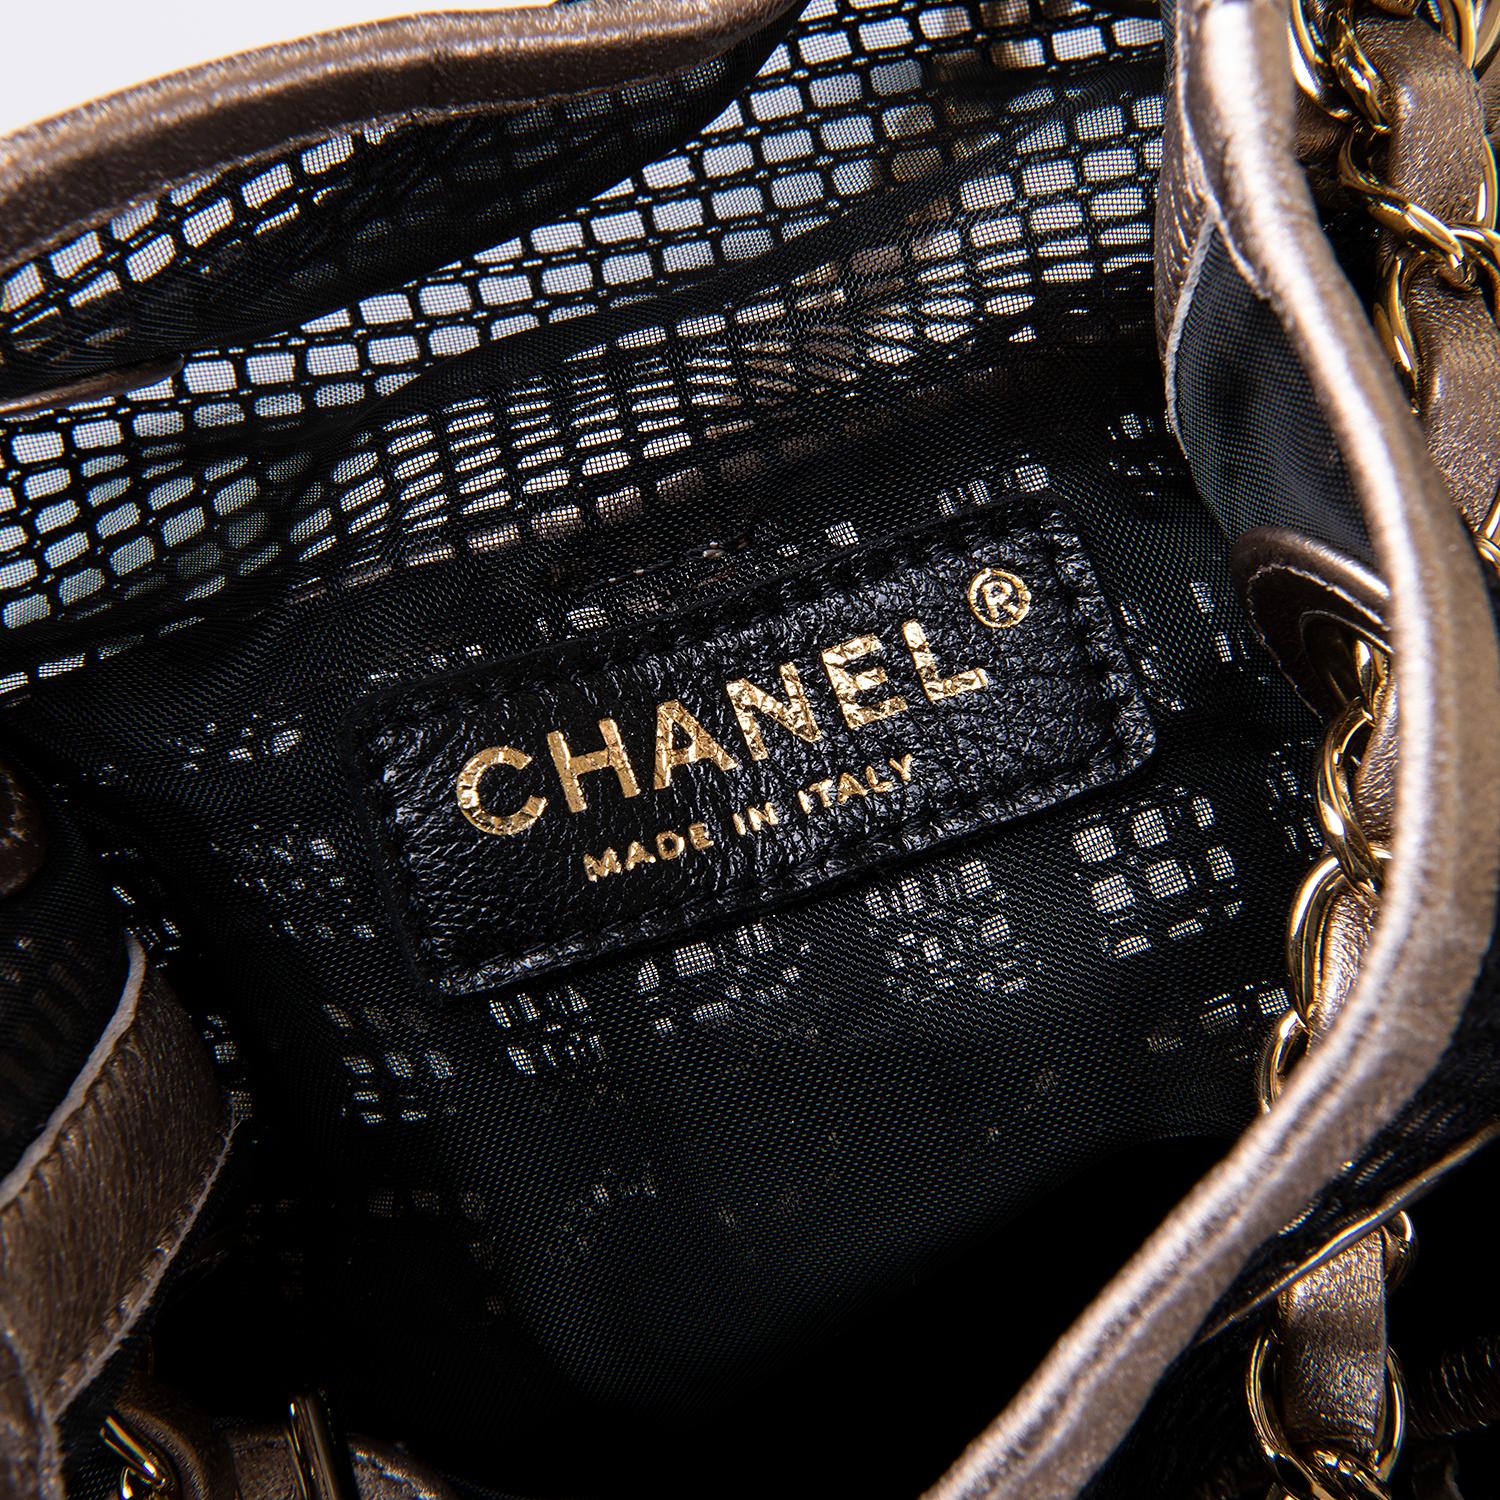 Pristine Limited Edition Chanel Shoulder Bag For Evening & Special Occasions im Zustand „Neu“ im Angebot in London, GB